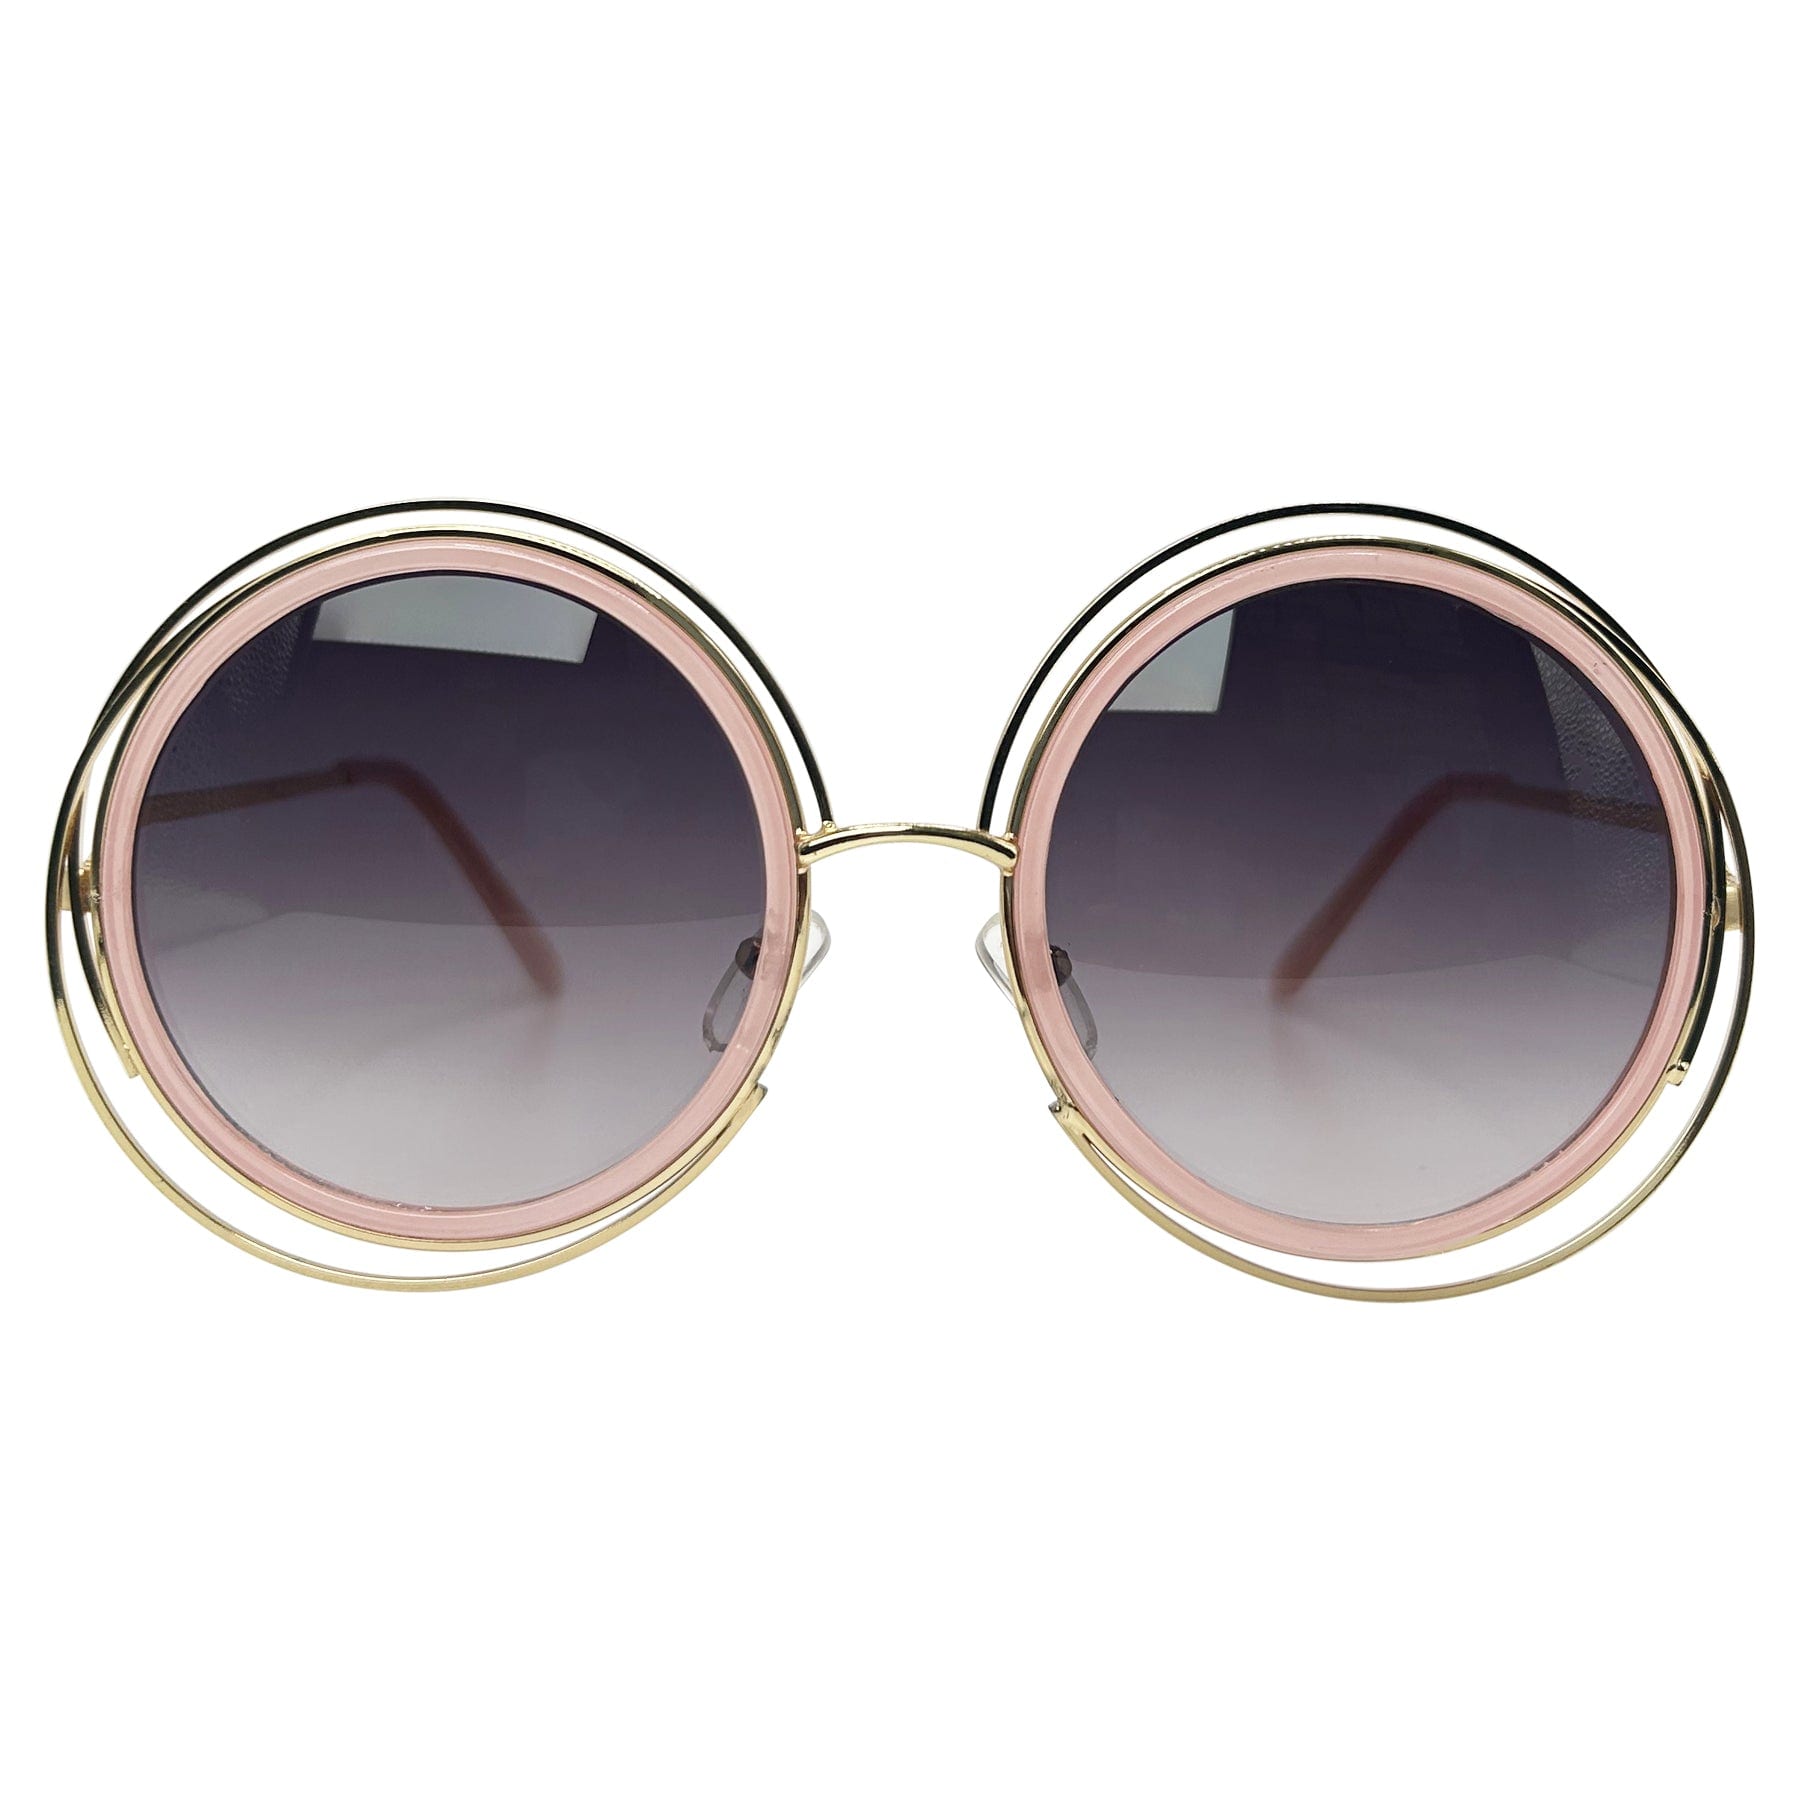 unique sunglasses with oversized and round shaped metal frame and lens